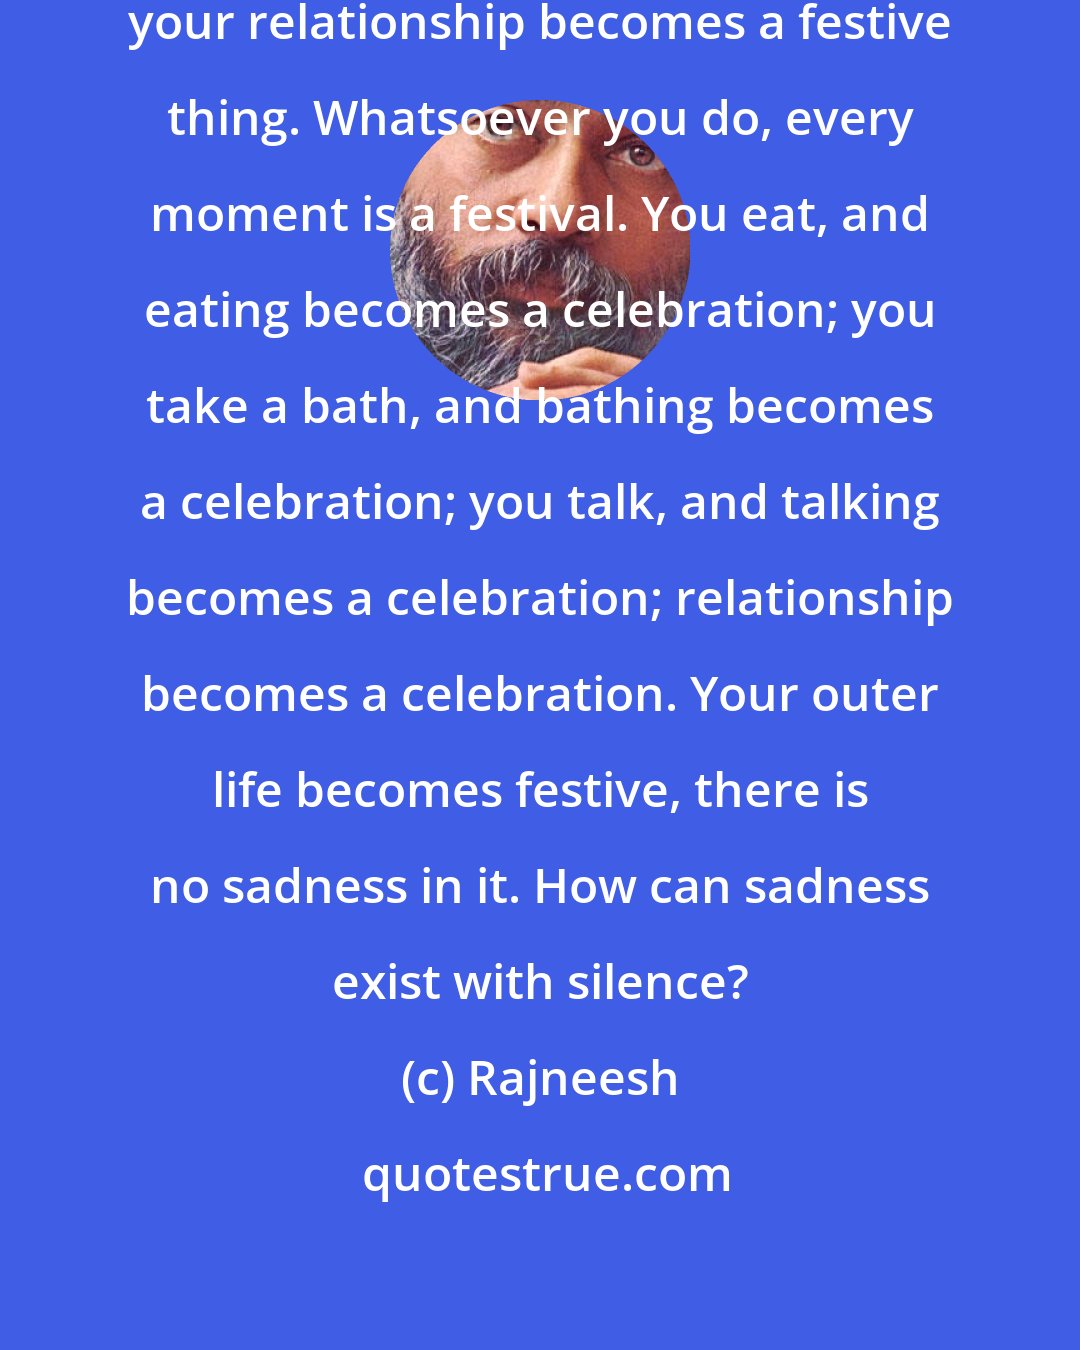 Rajneesh: So your life becomes a vital celebration, your relationship becomes a festive thing. Whatsoever you do, every moment is a festival. You eat, and eating becomes a celebration; you take a bath, and bathing becomes a celebration; you talk, and talking becomes a celebration; relationship becomes a celebration. Your outer life becomes festive, there is no sadness in it. How can sadness exist with silence?